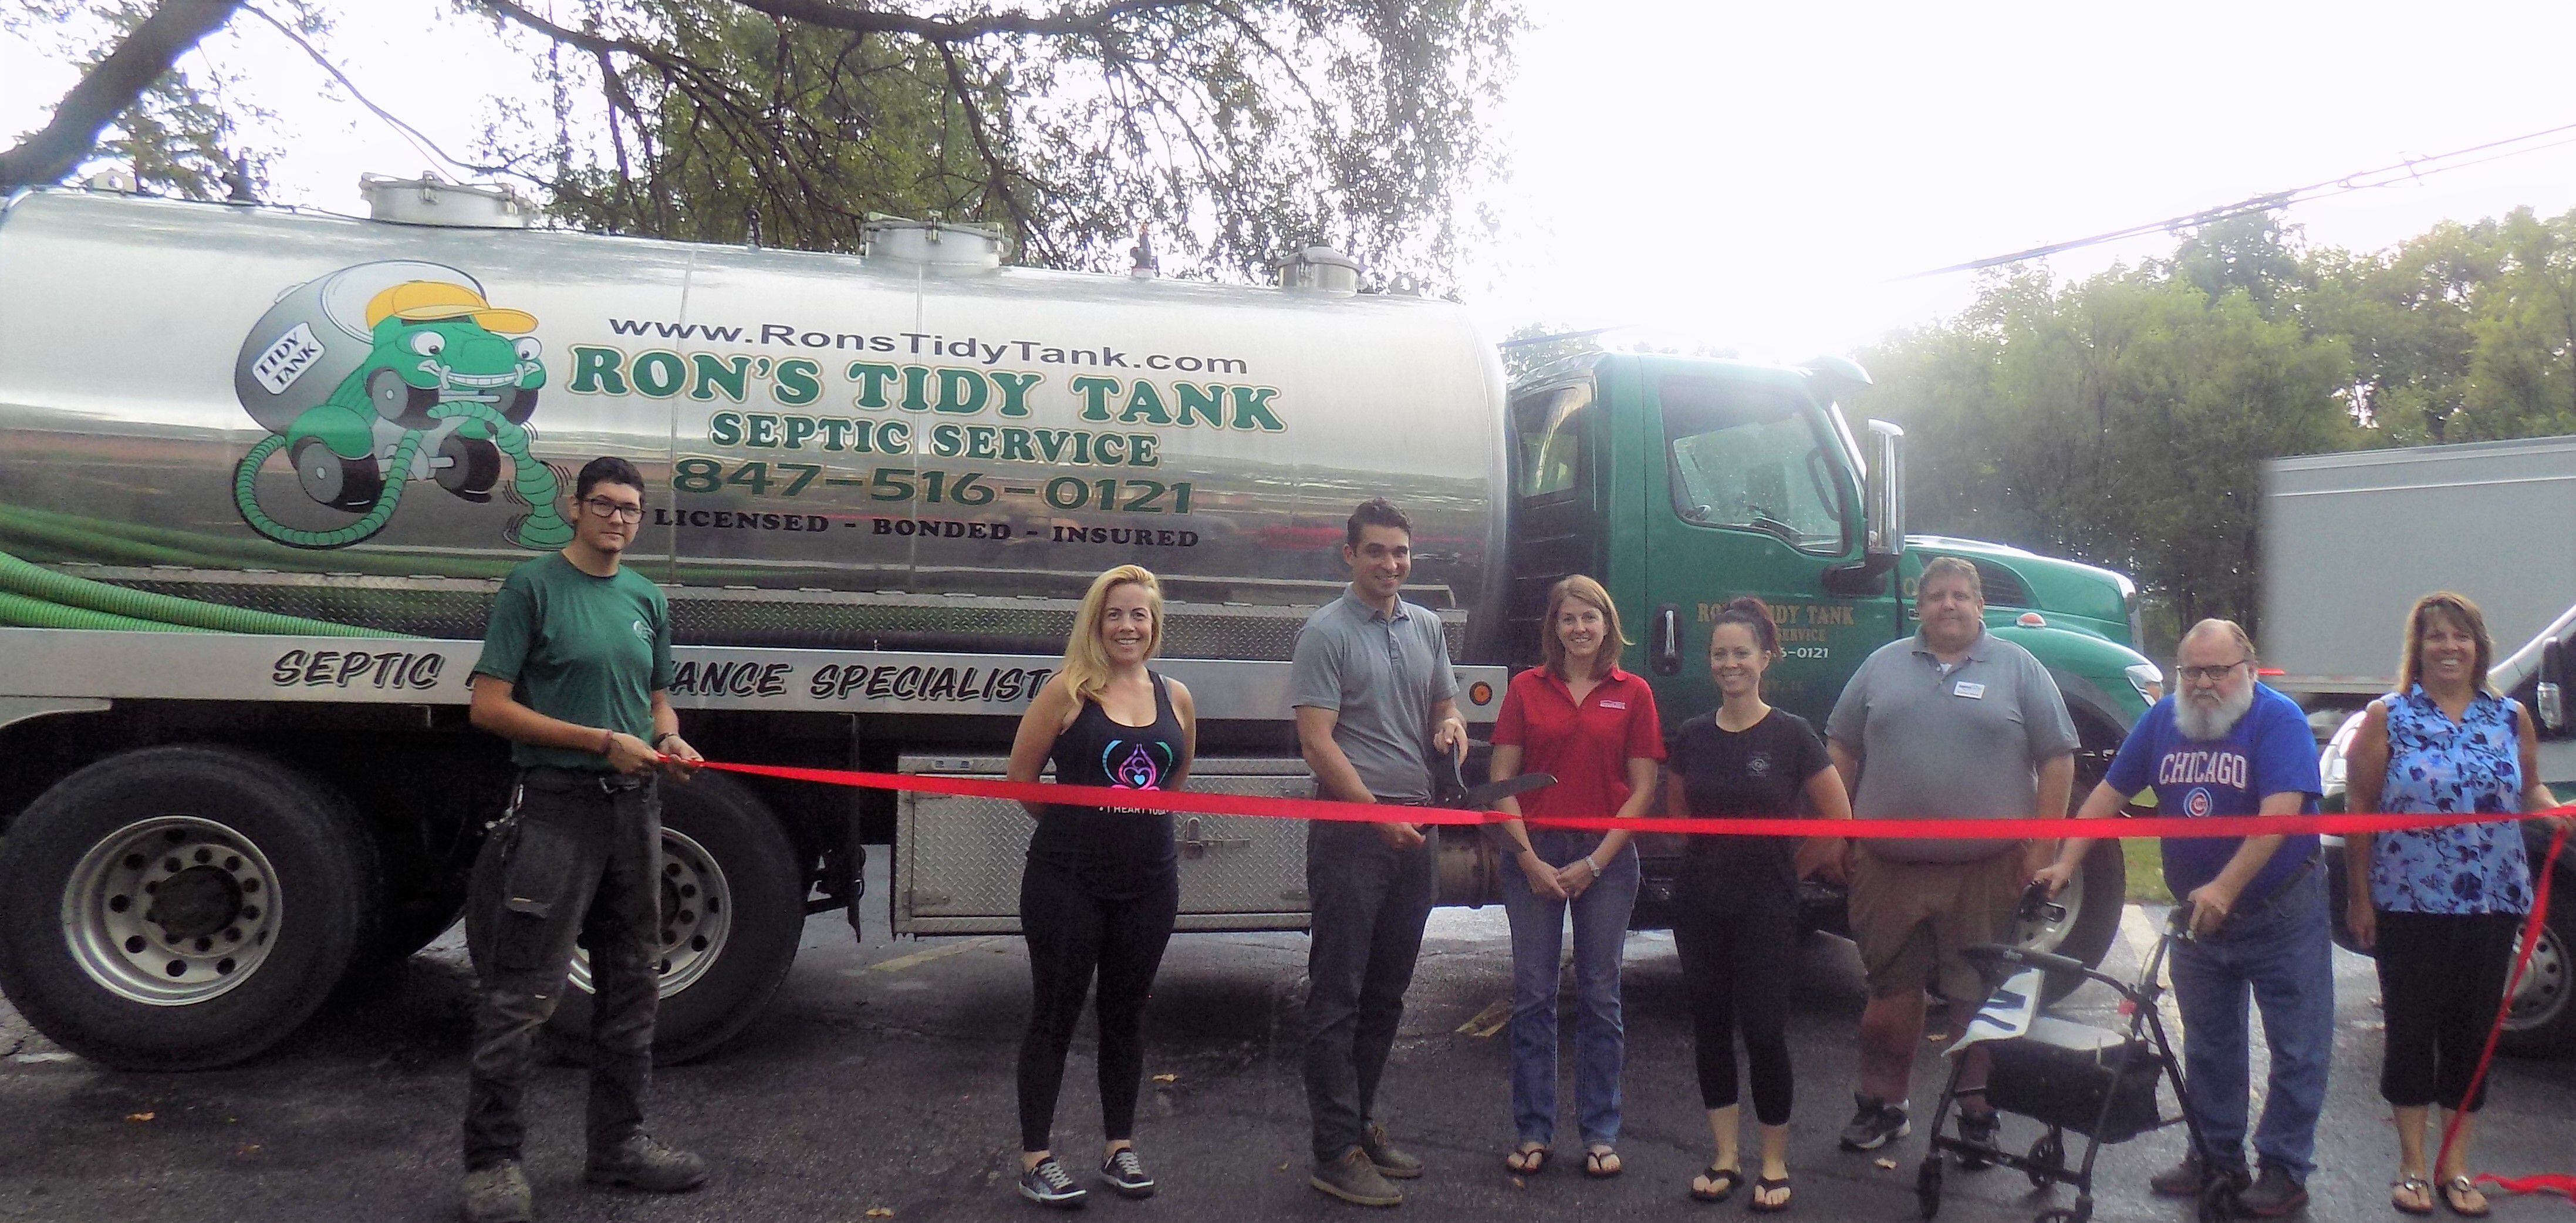 Ron's Tidy Tank Septic Service in Cary acquired by new owner